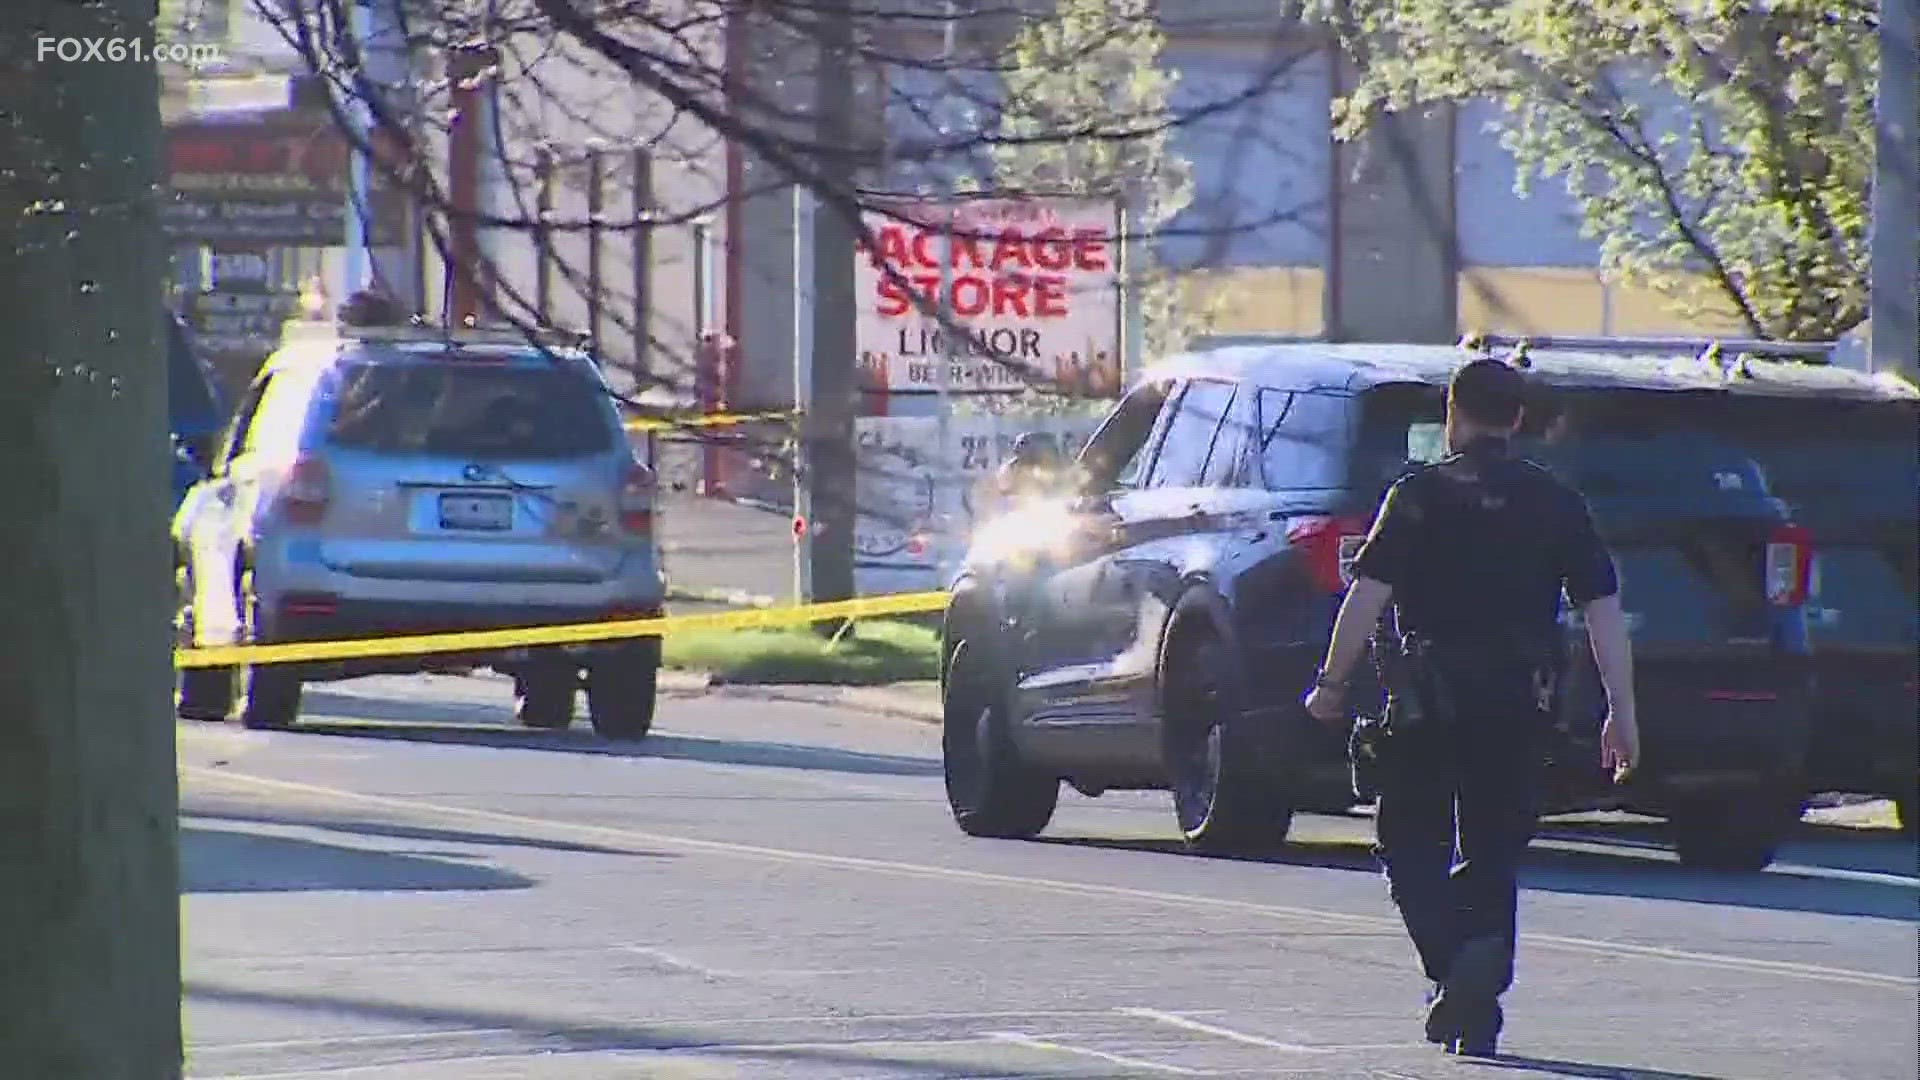 The shooting happened around 6 a.m. Tuesday causing part of Broad Street to be closed all morning.